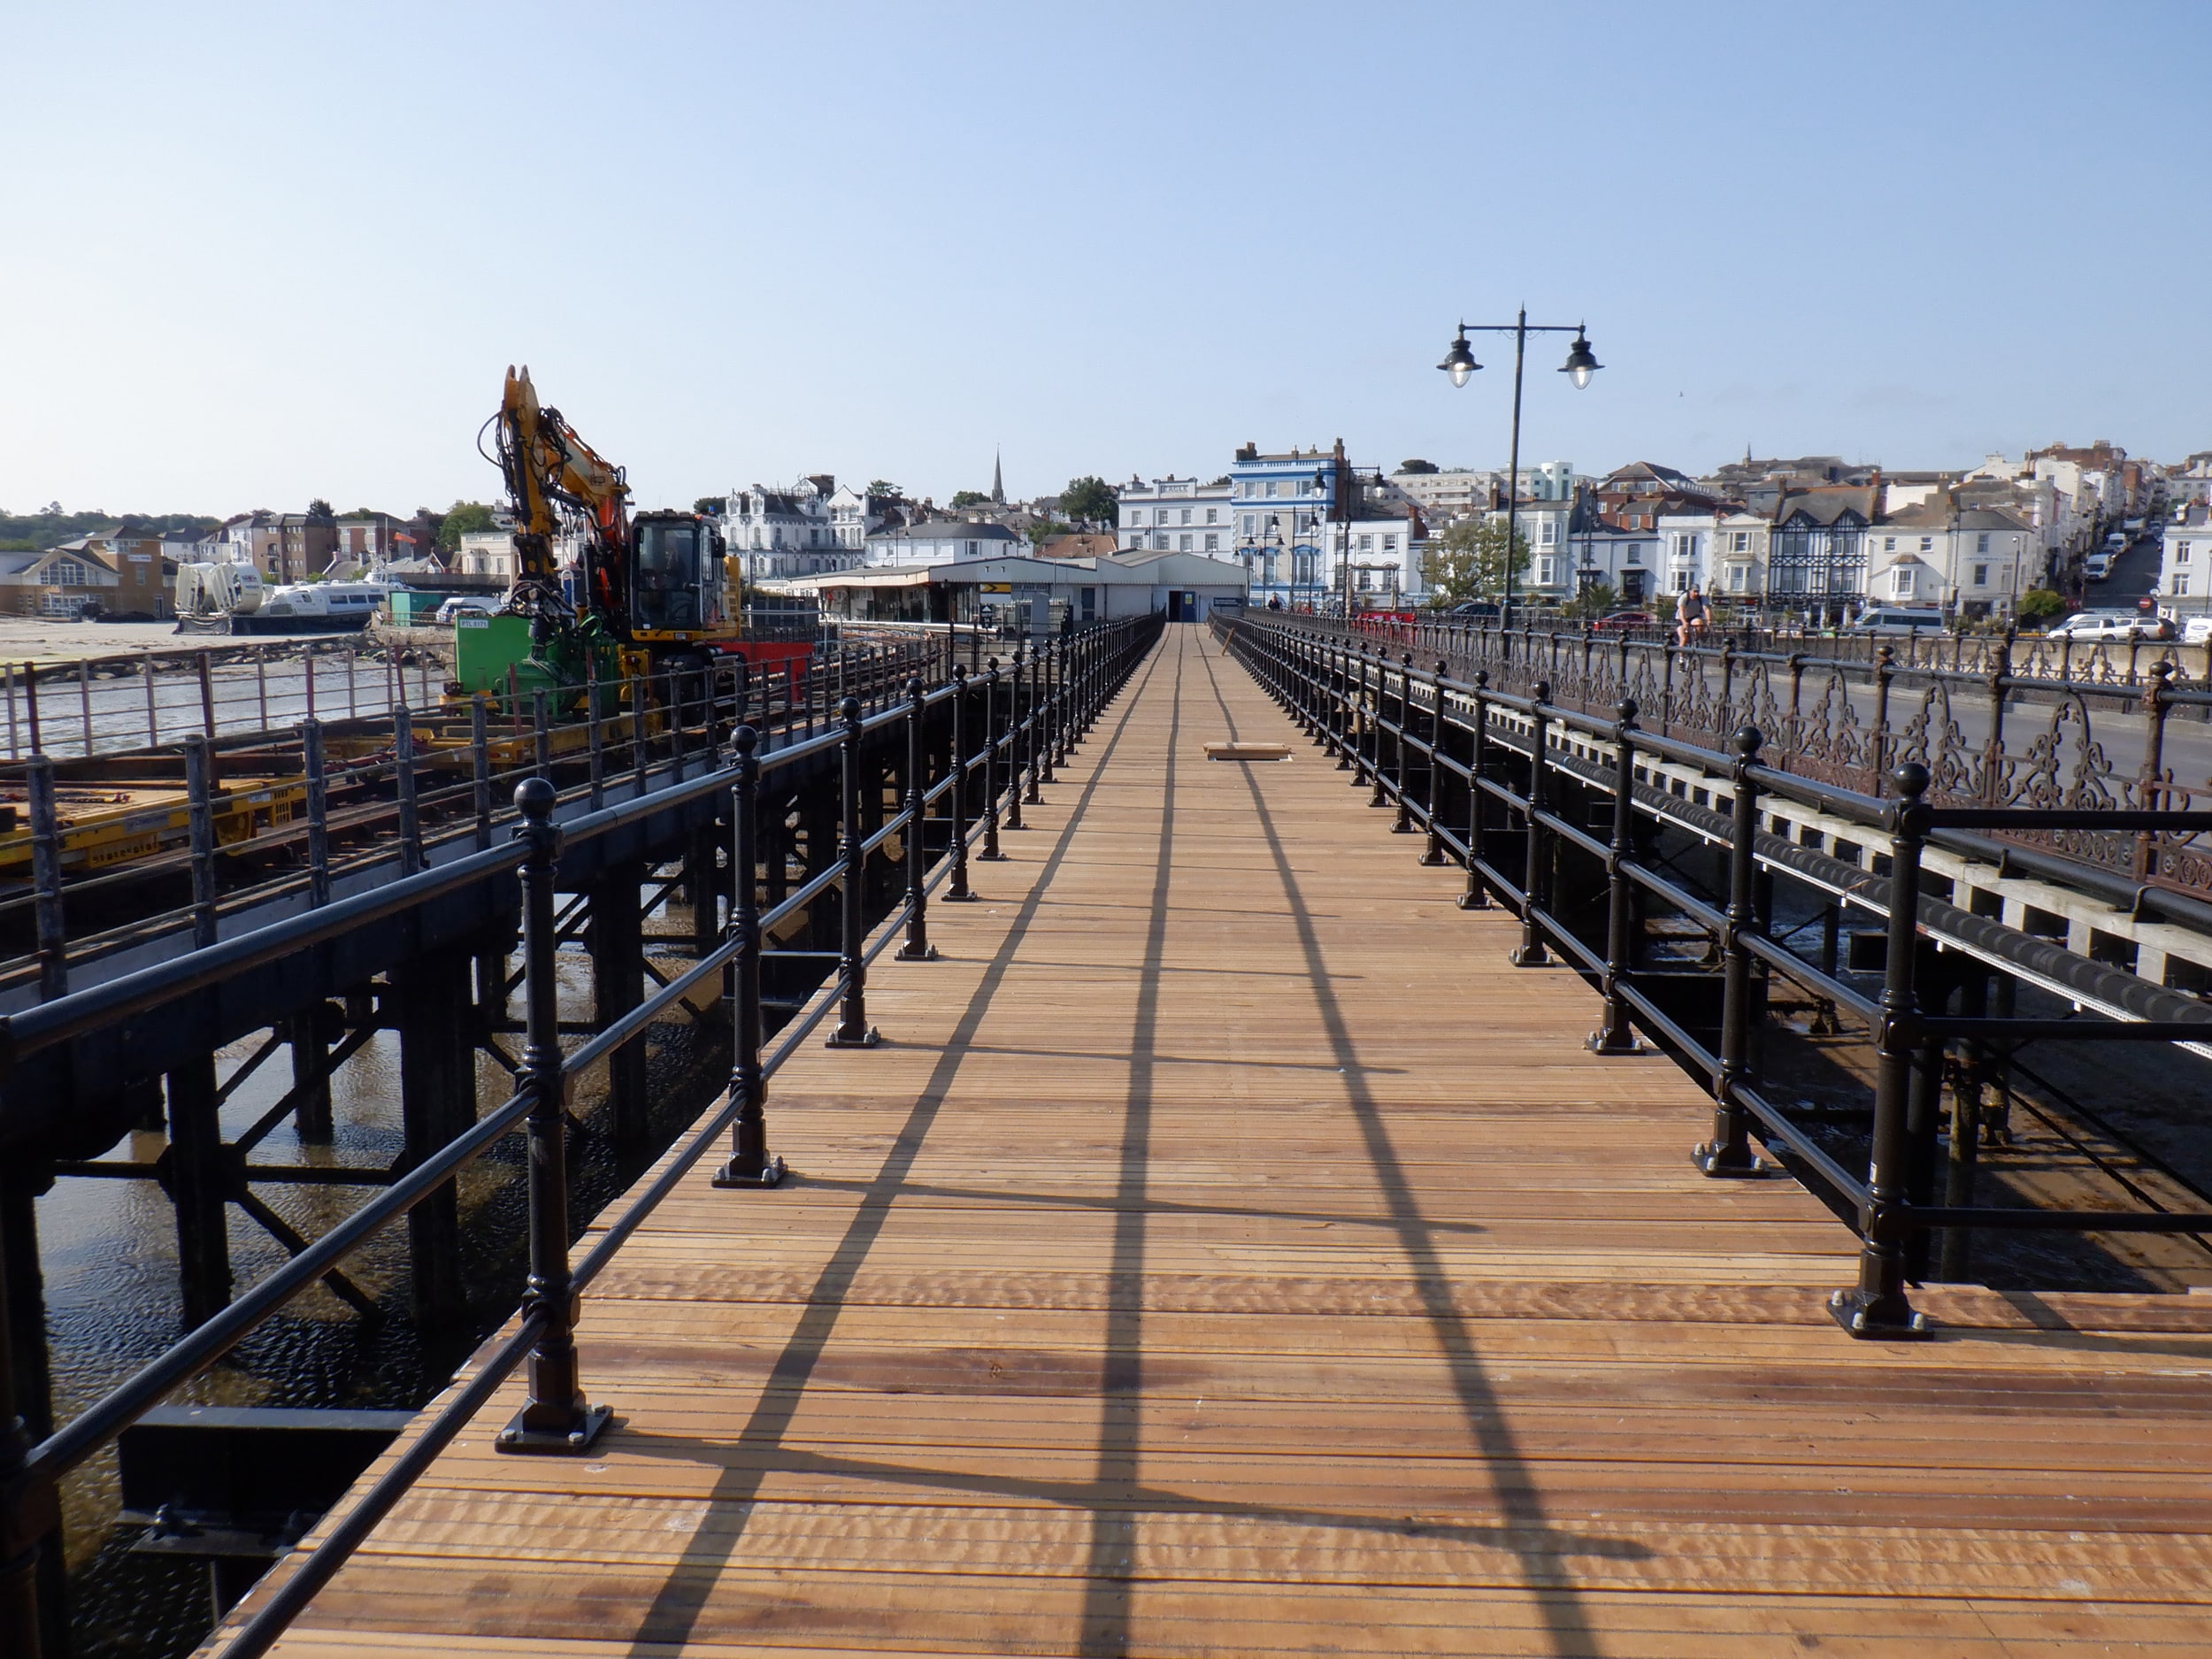 Solving marine engineering challenges: AWA’s involvement in rebuilding Ryde Pier